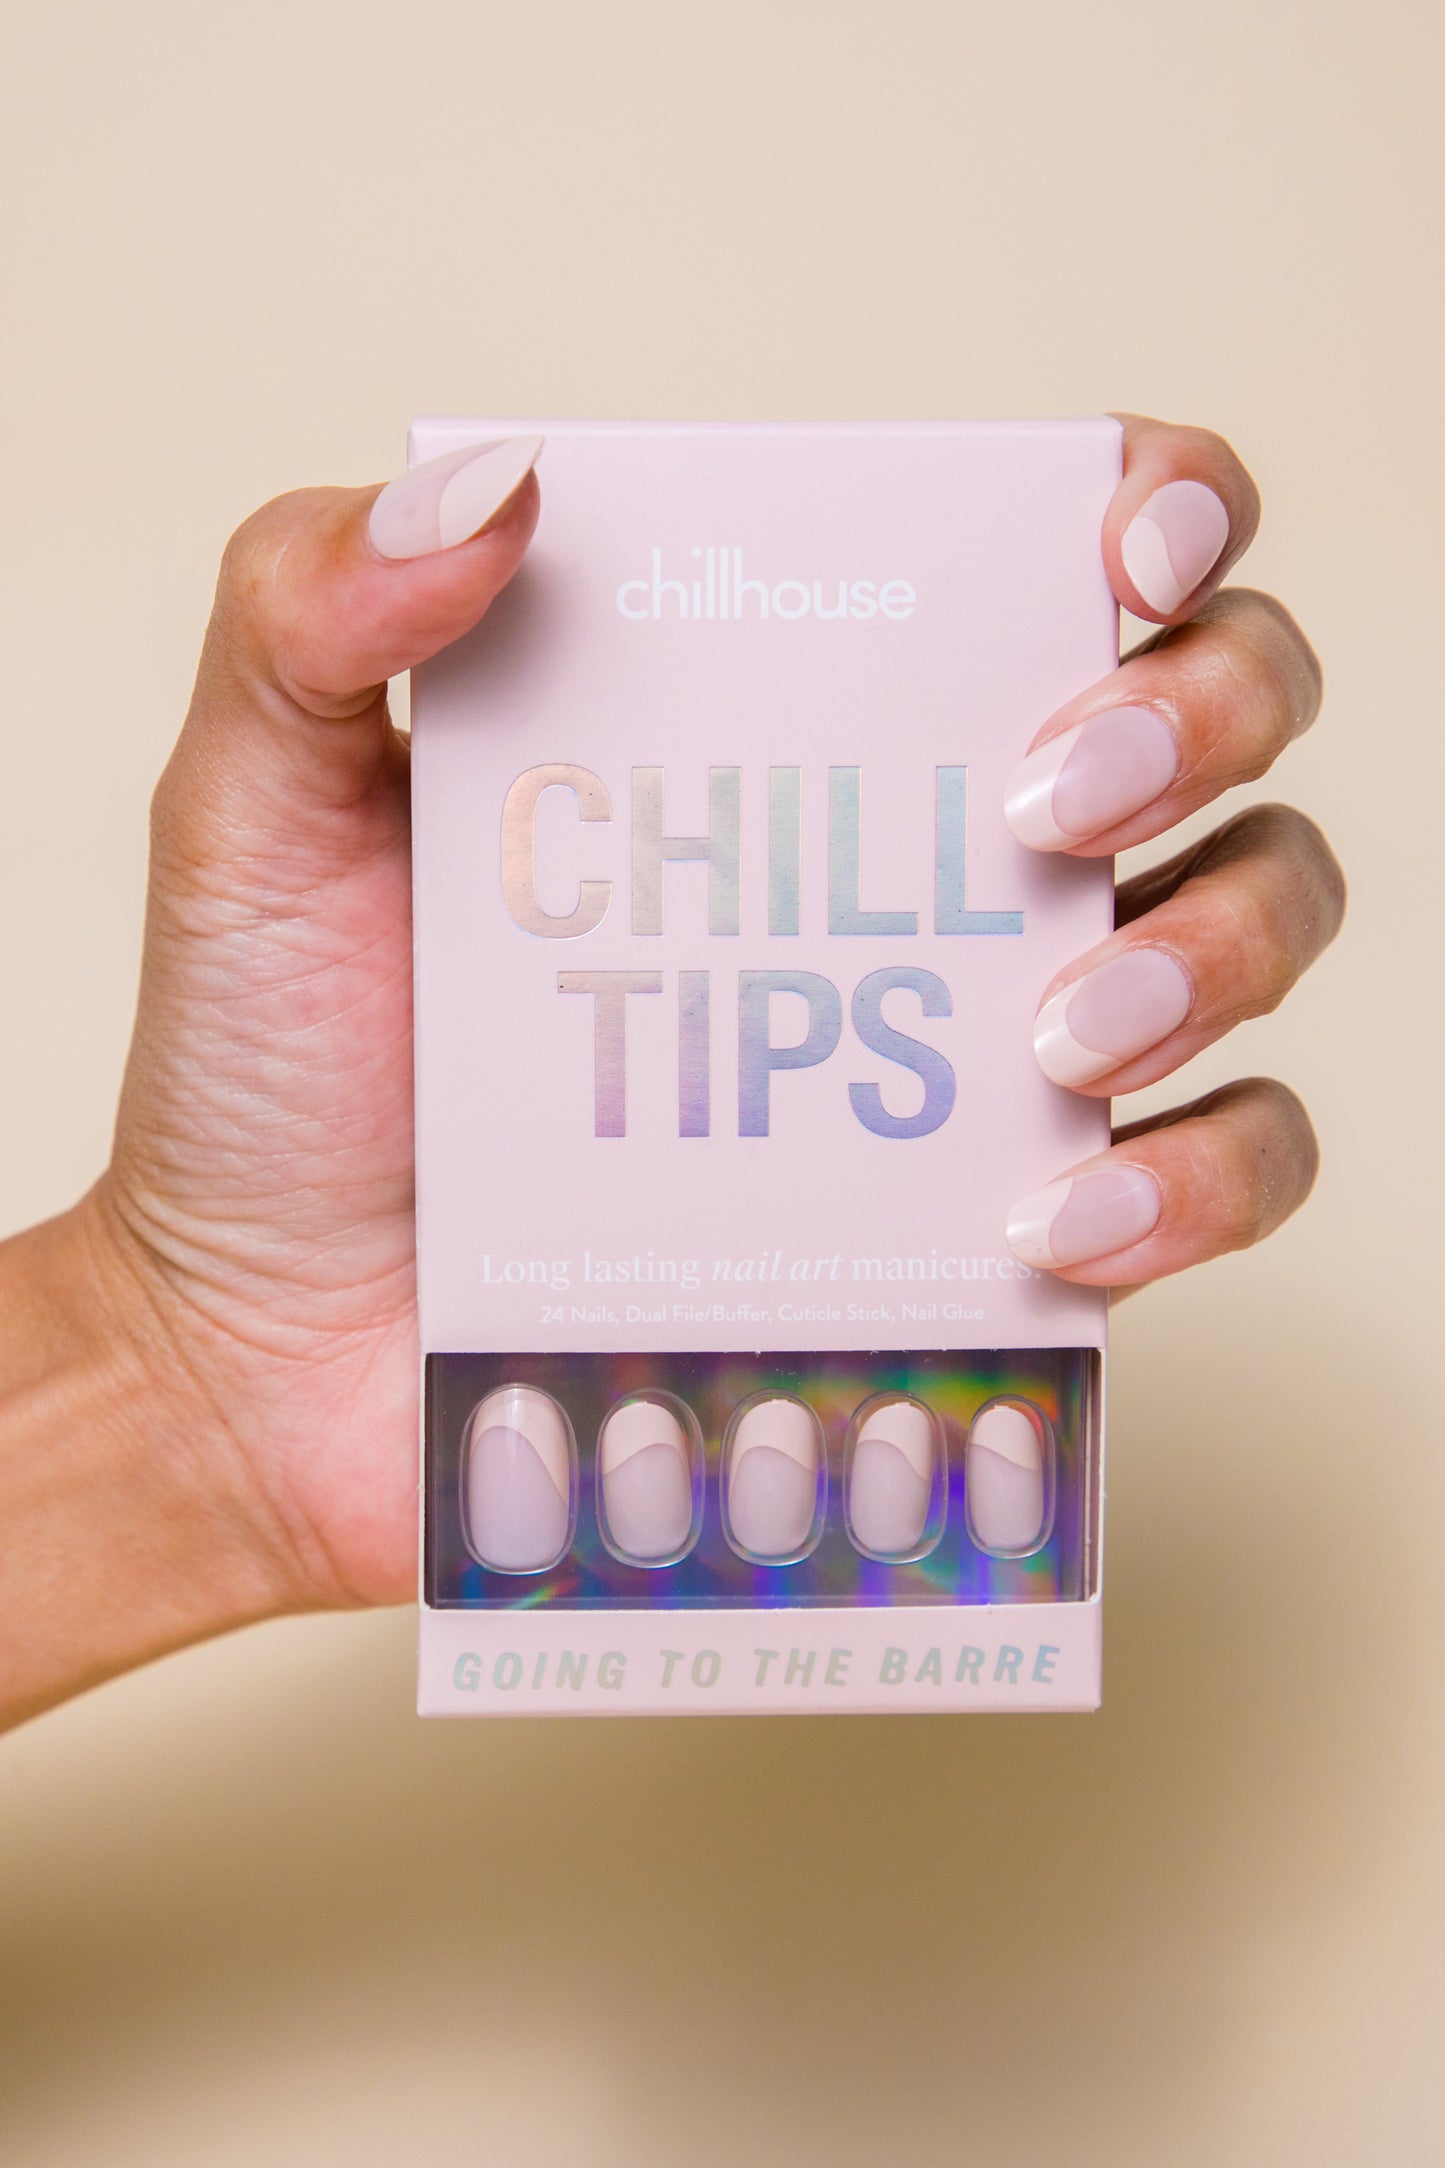 Chill Tips - Going To The Barre by Chillhouse